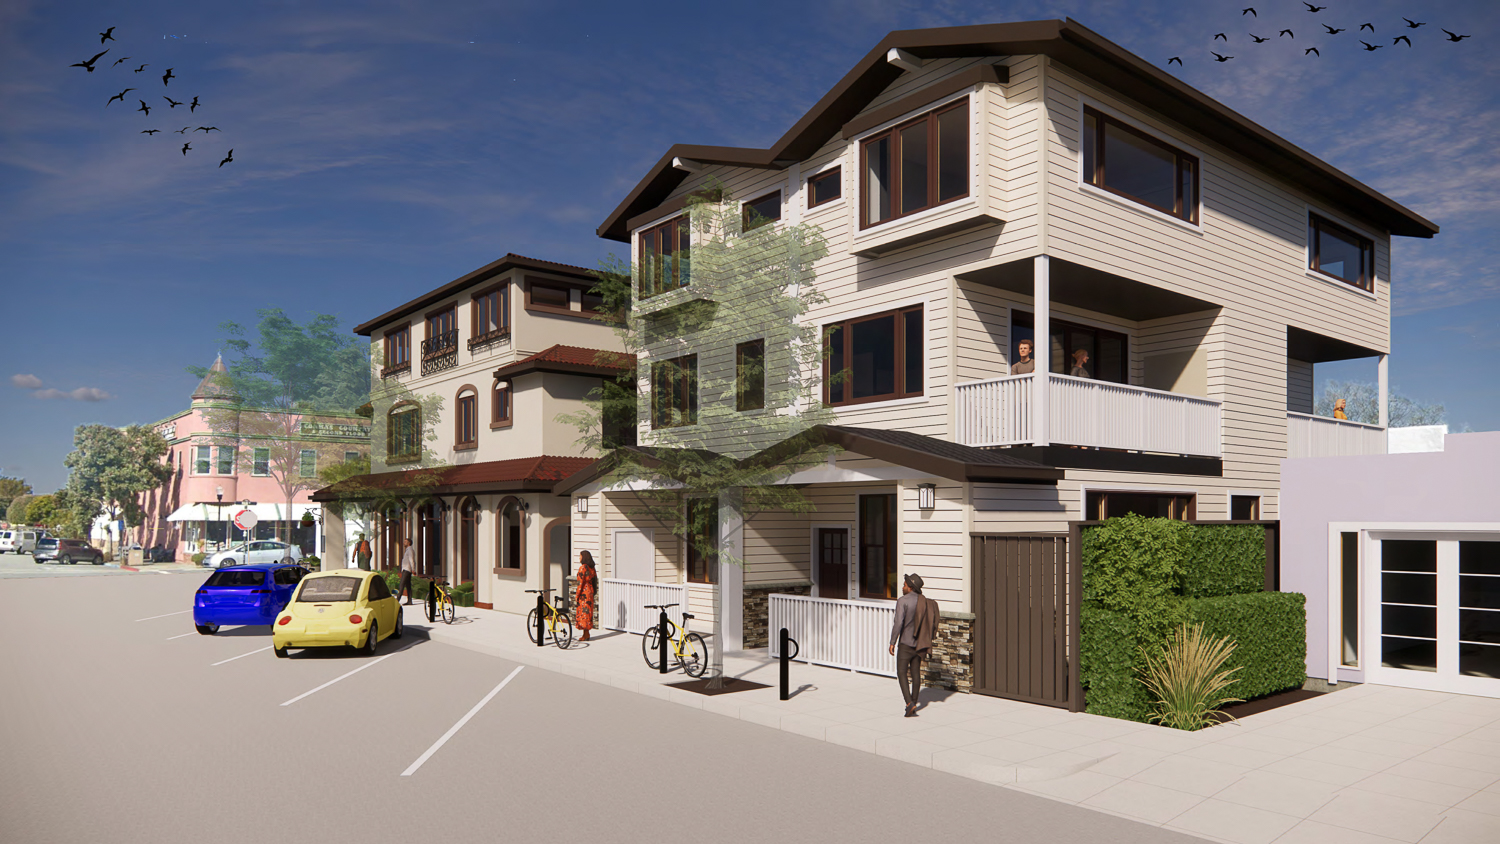 433 Main Street townhomes along Kelly Avenue, rendering by Edward C Love Architects